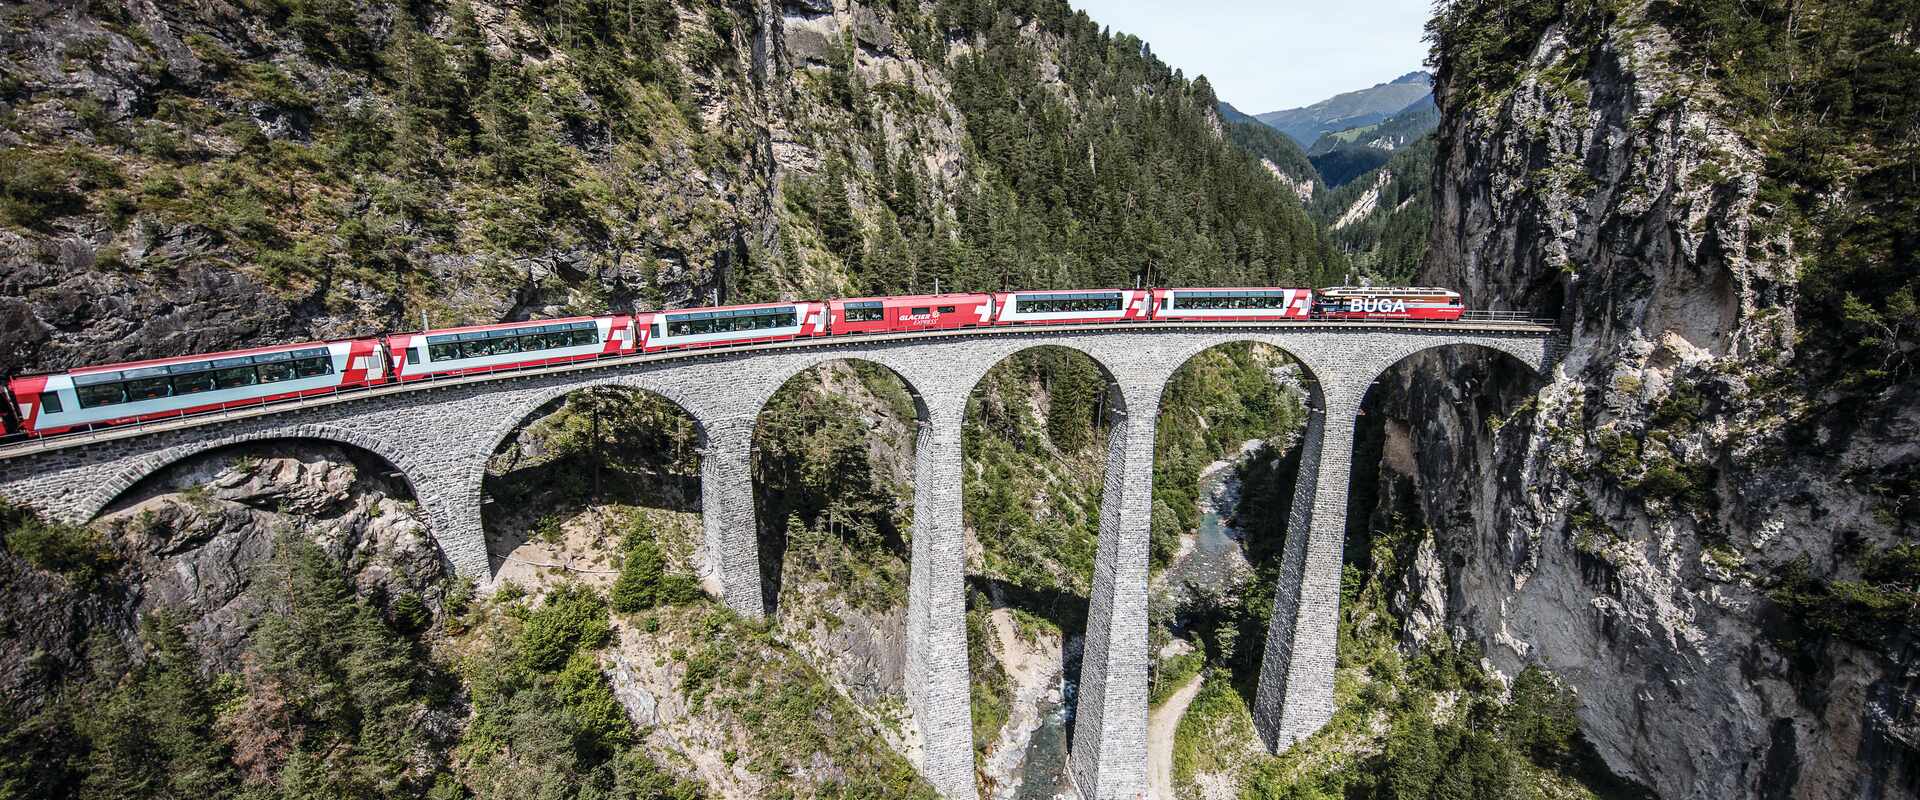 Glacier Express travelling over a viaduct in Switzerland